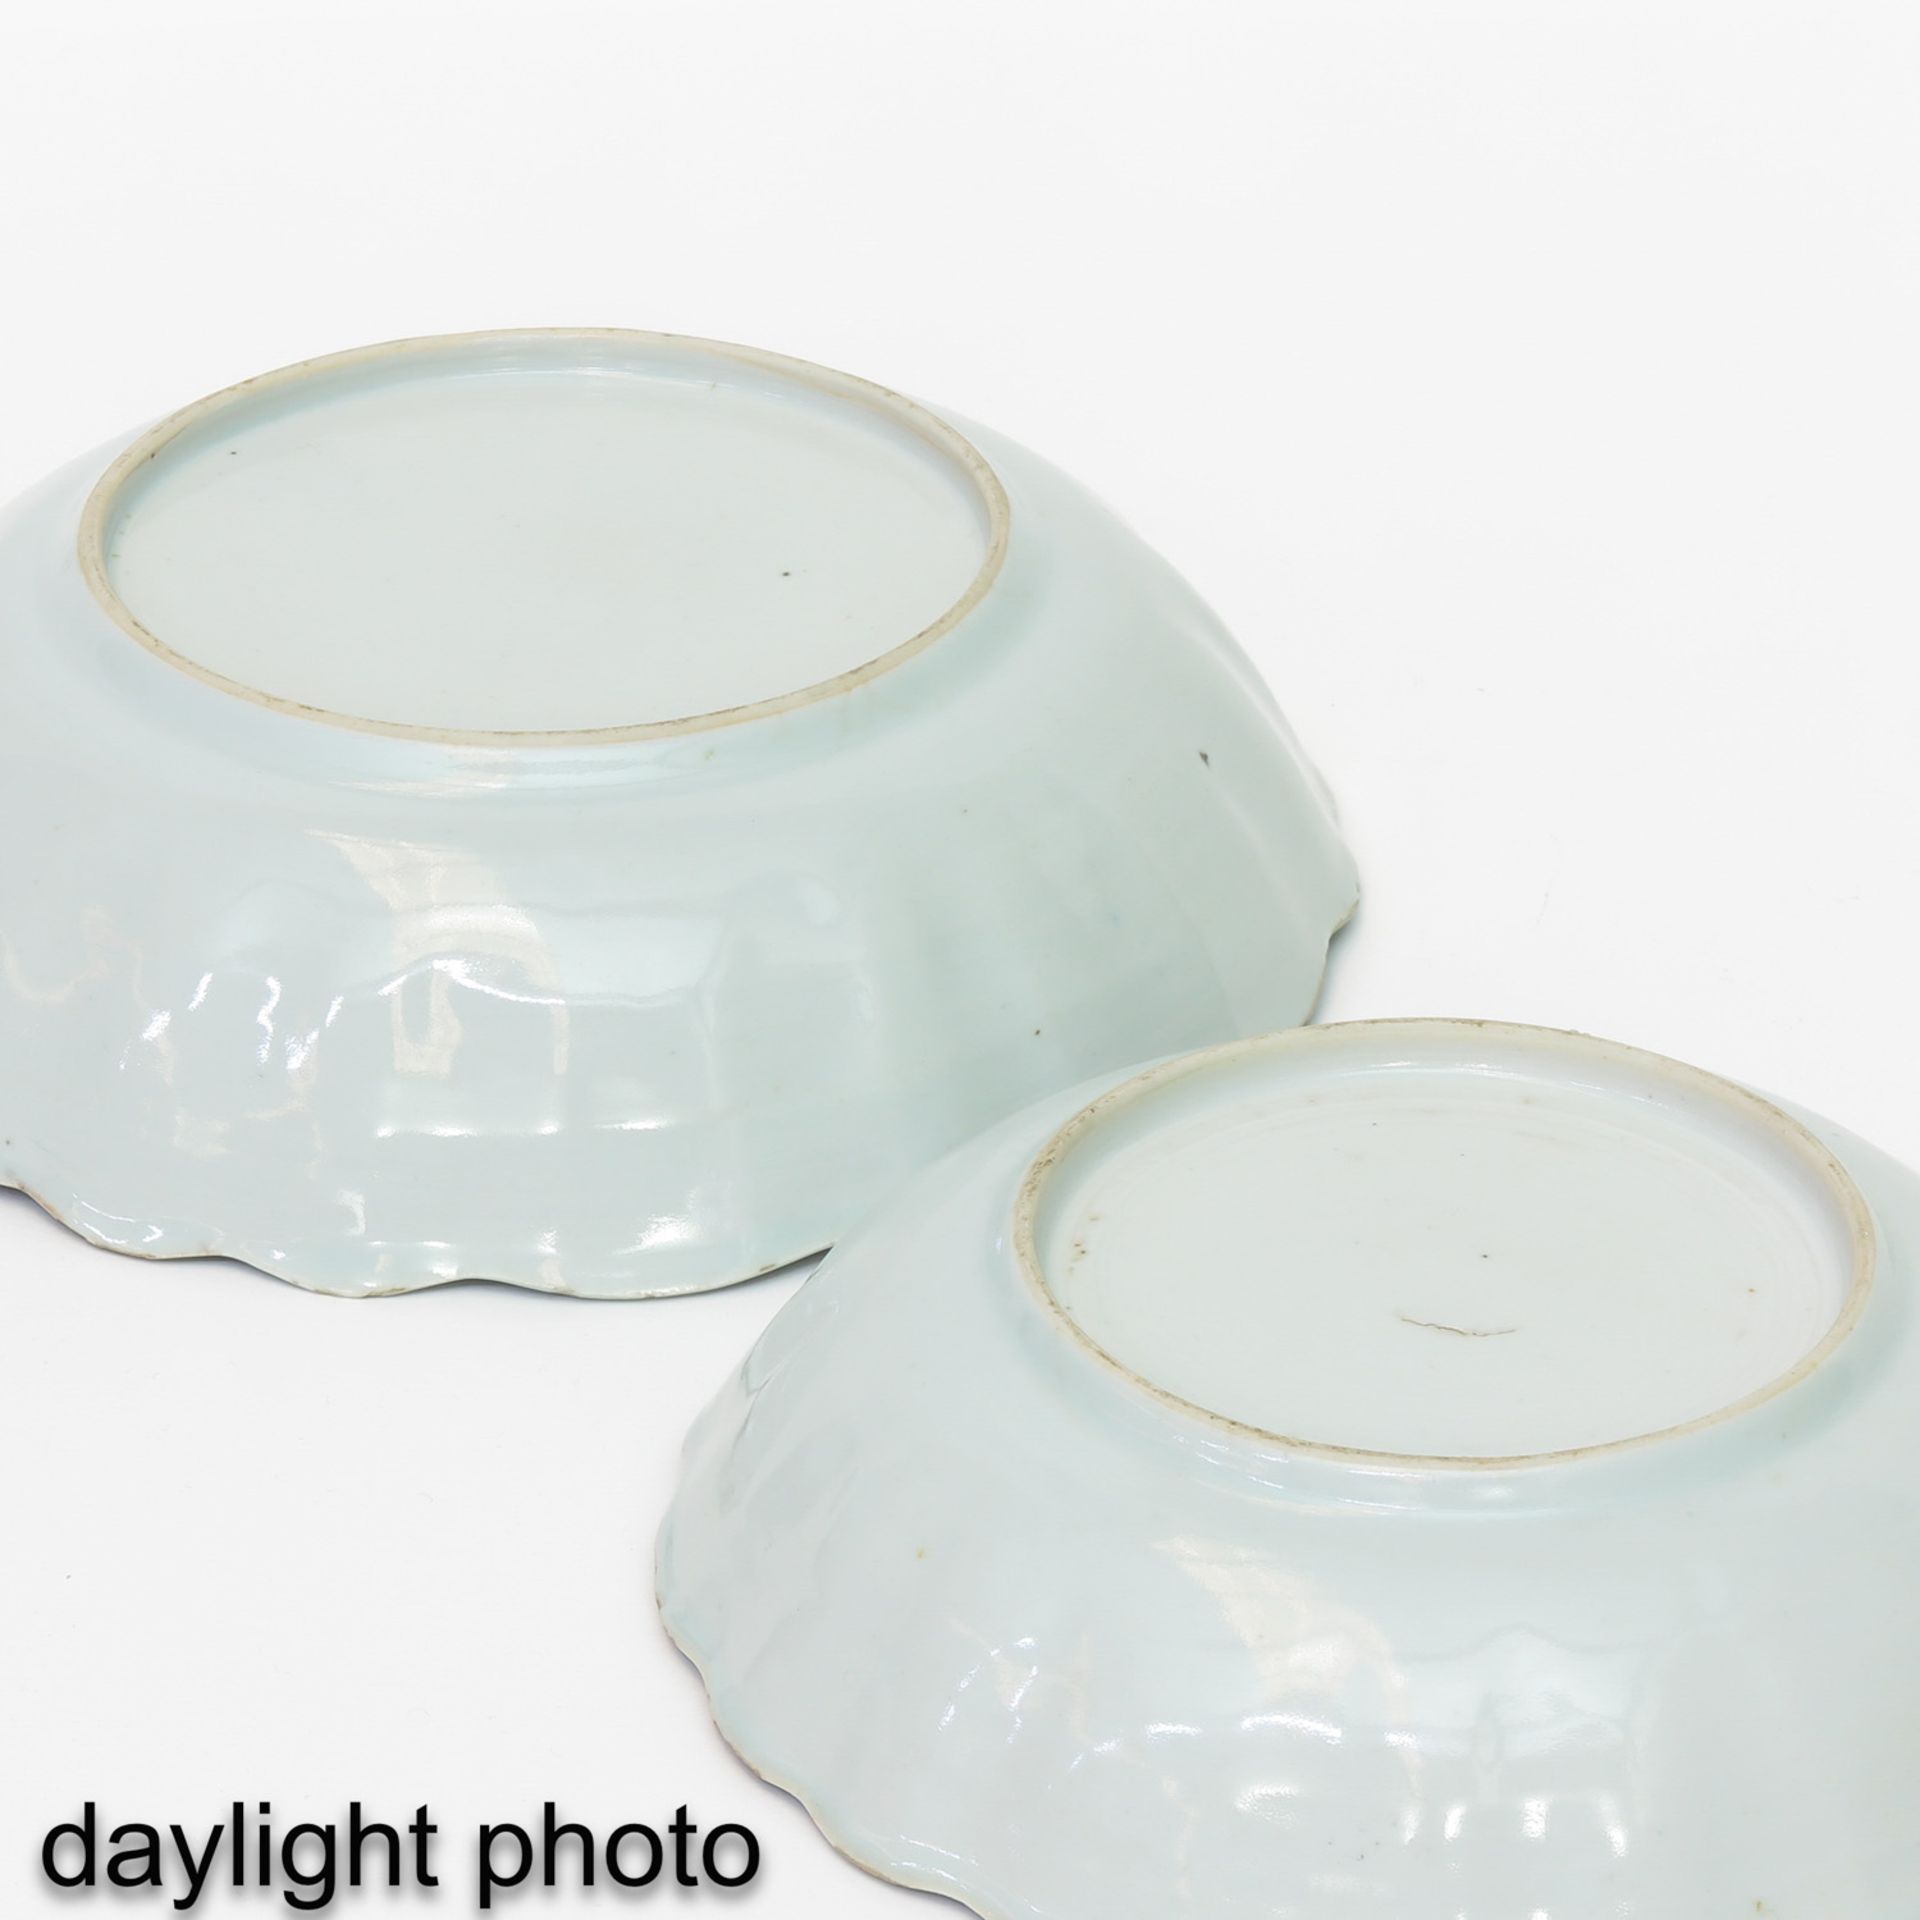 A Collection of 3 Blue and White Bowls - Image 10 of 10